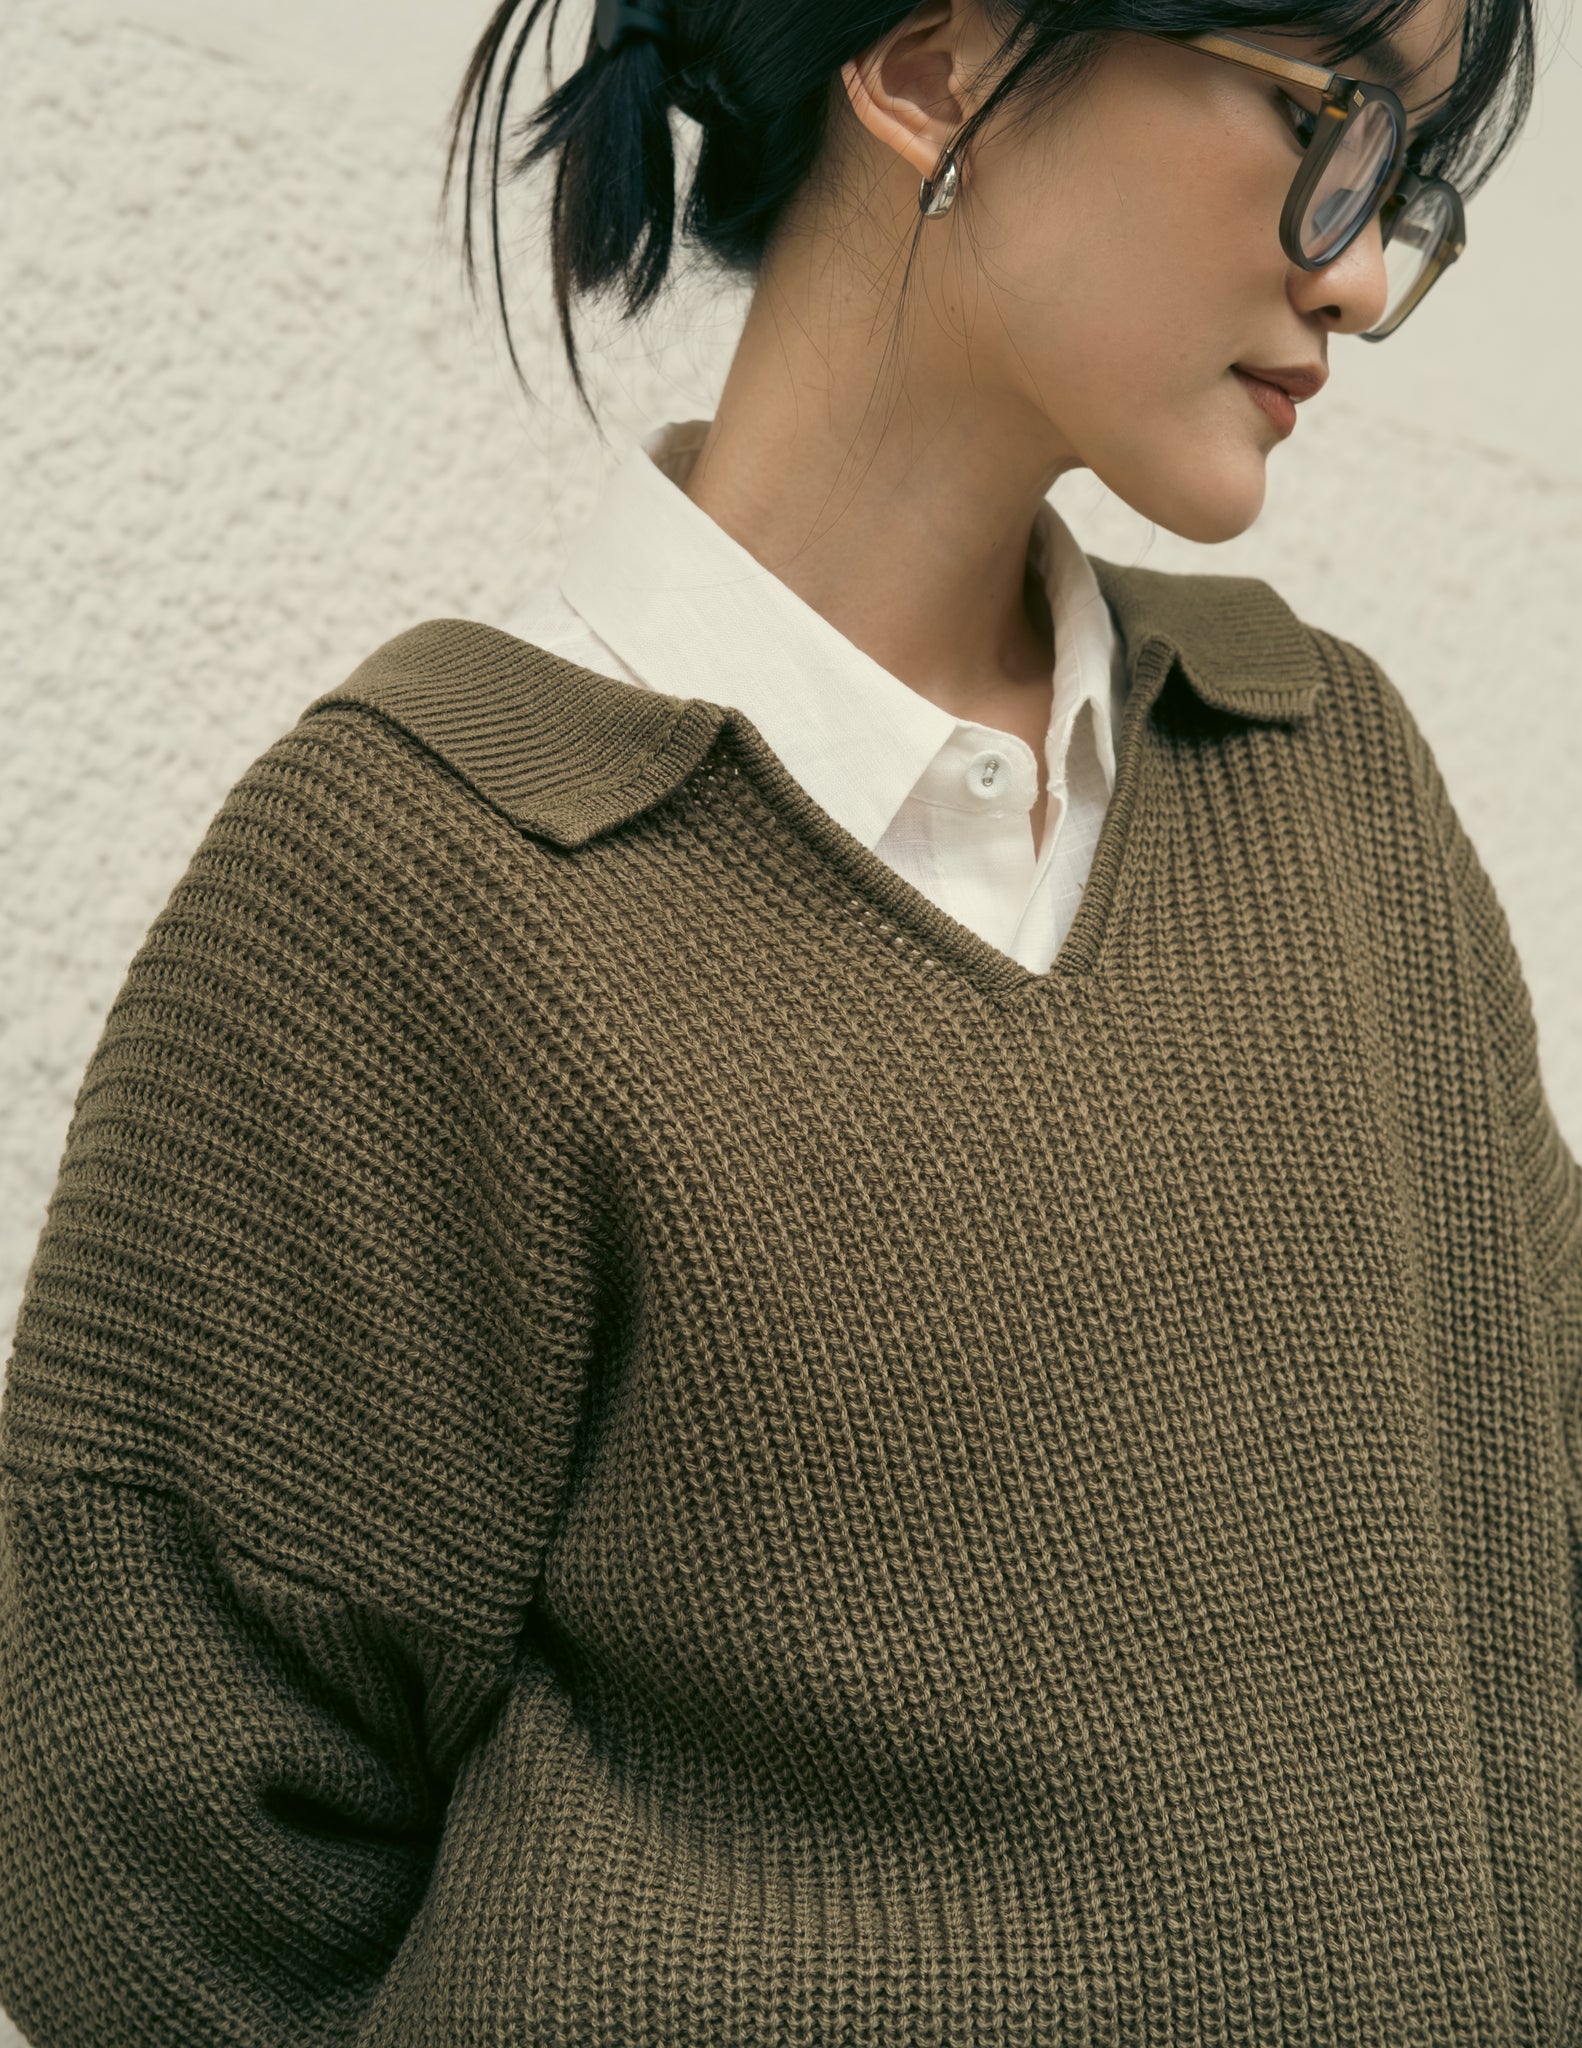 Unisex: The Knitted Jumper (Olive)